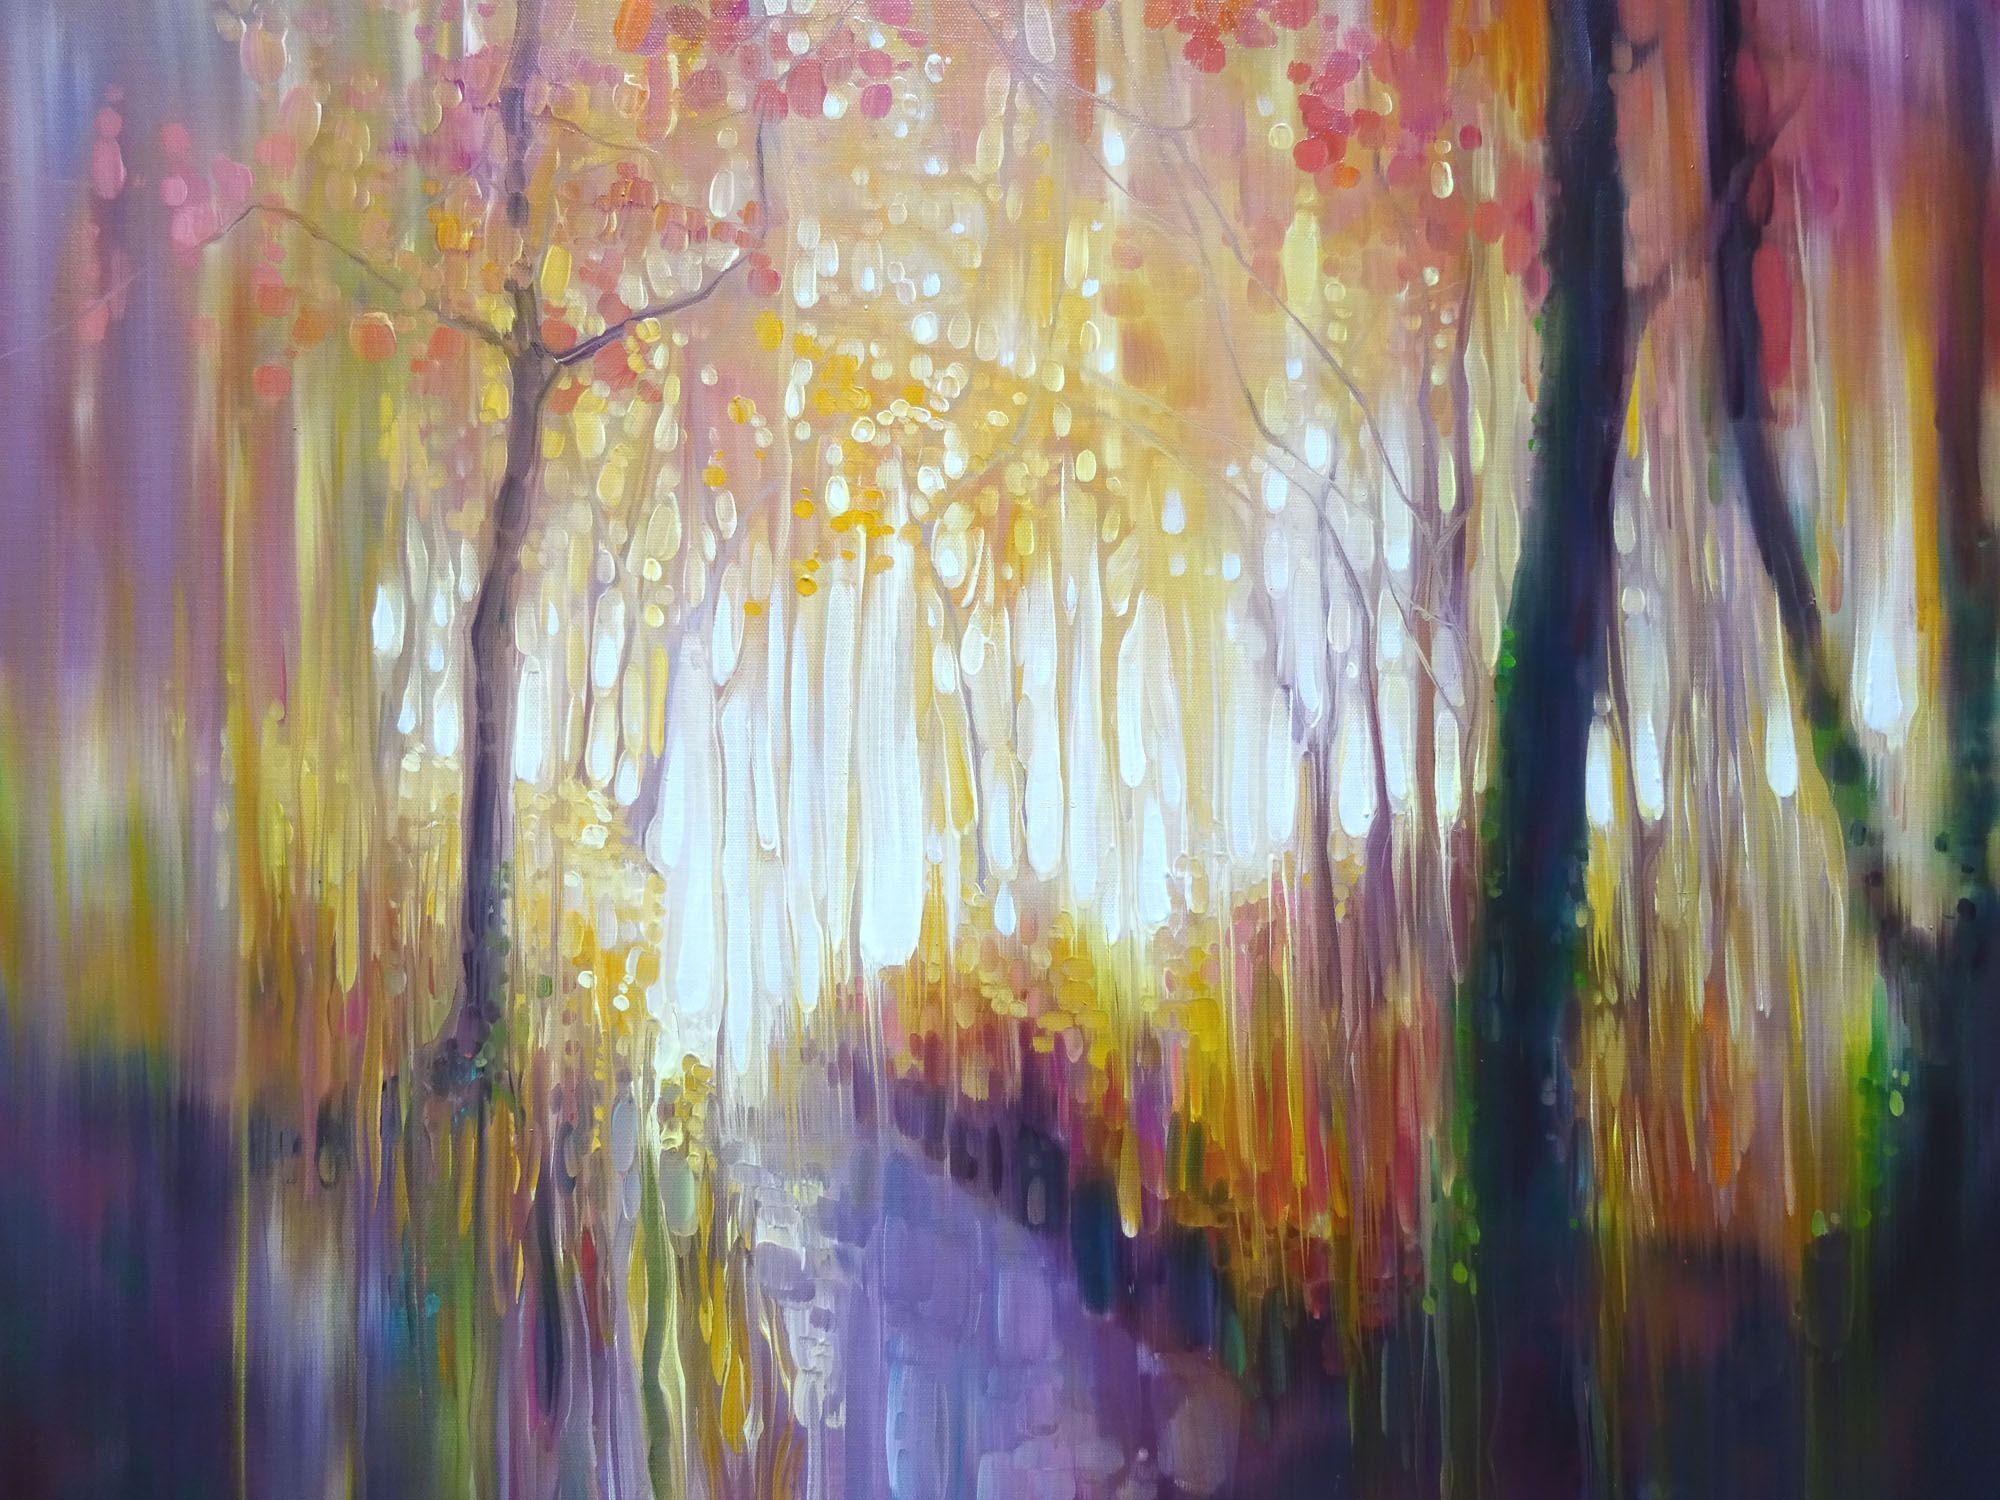 October Glows, Painting, Oil on Canvas 3